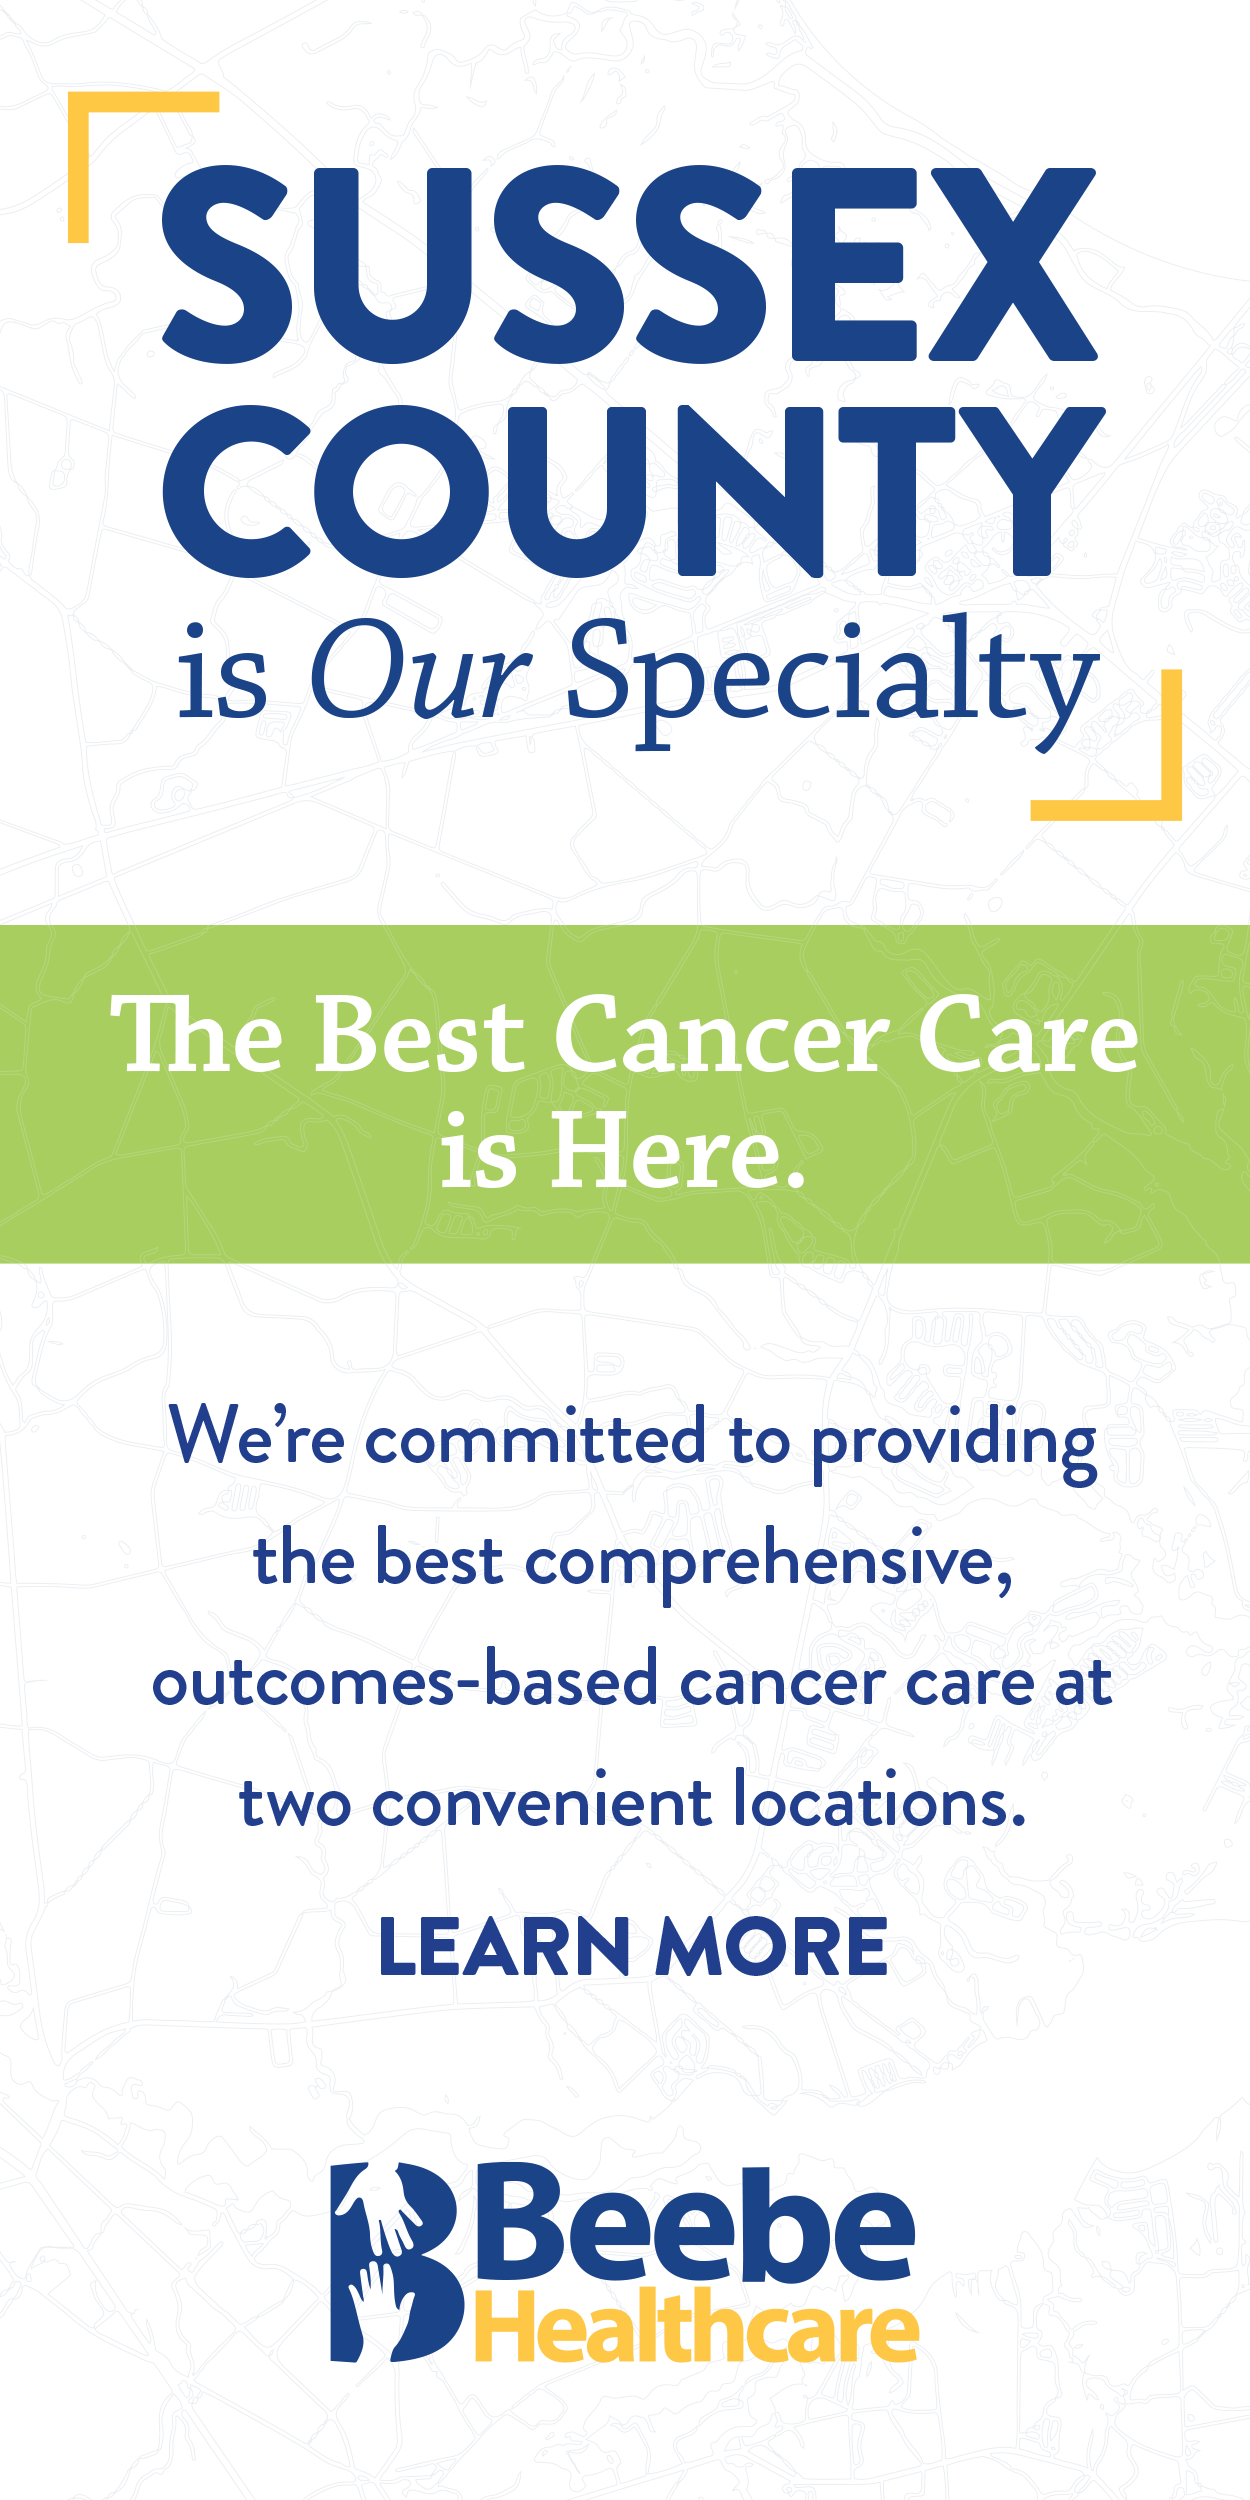 Beebe Healthcare - The Best Cancer Care is Here.